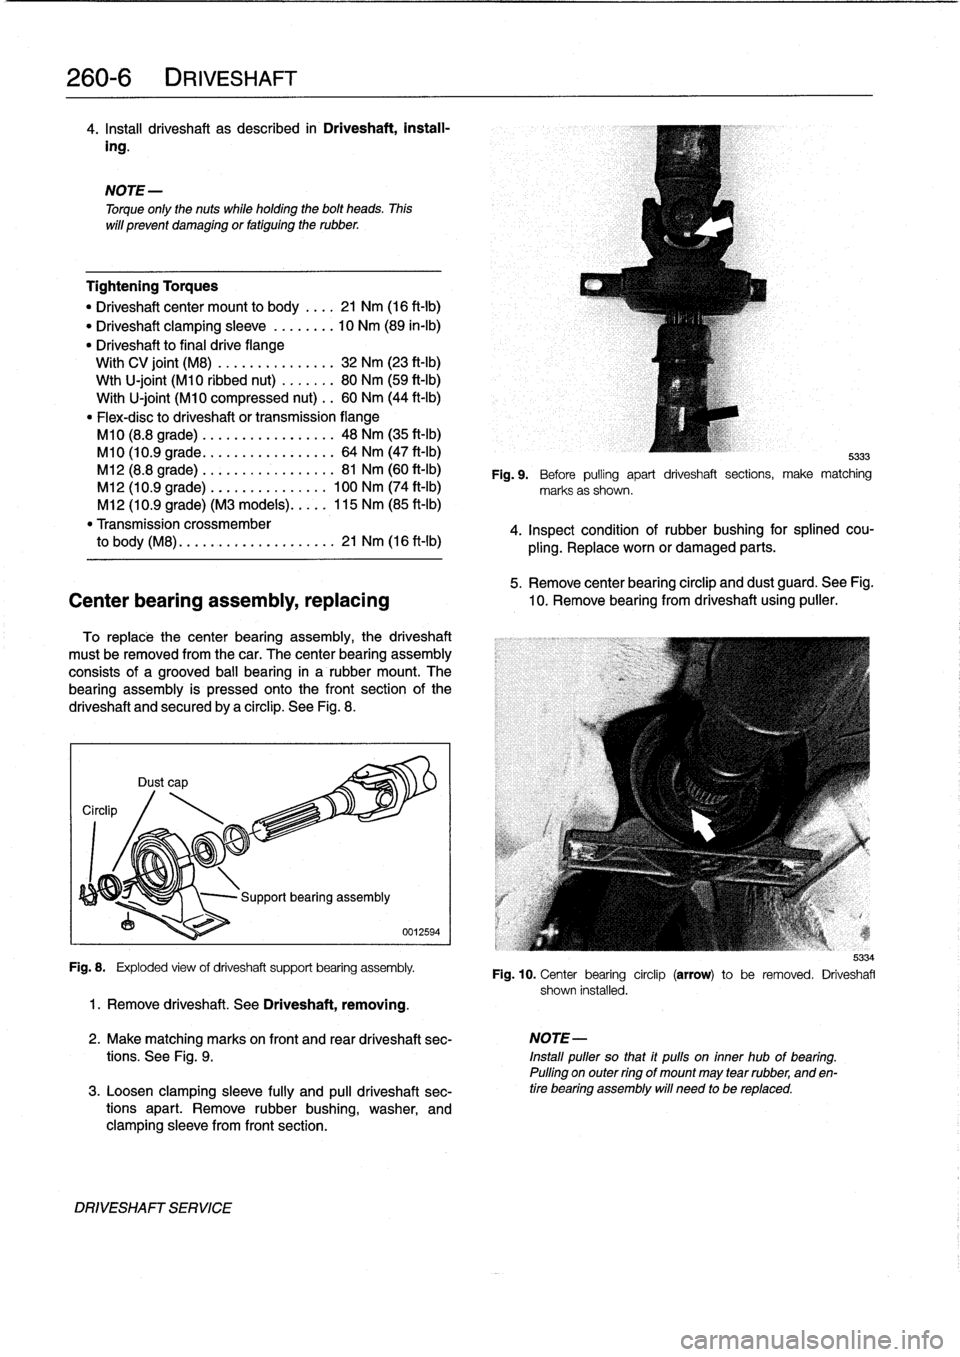 BMW 328i 1994 E36 Workshop Manual 
260-
6
DRIVESHAFT

4
.
Insta¡¡
driveshaft
as
described
in
Driveshaft,
install-

ing
.

Tightening
Torques

"
Driveshaft
center
mount
to
body
.
...
21
Nm
(16
ft-Ib)

"
Driveshaft
clamping
sleeve
...